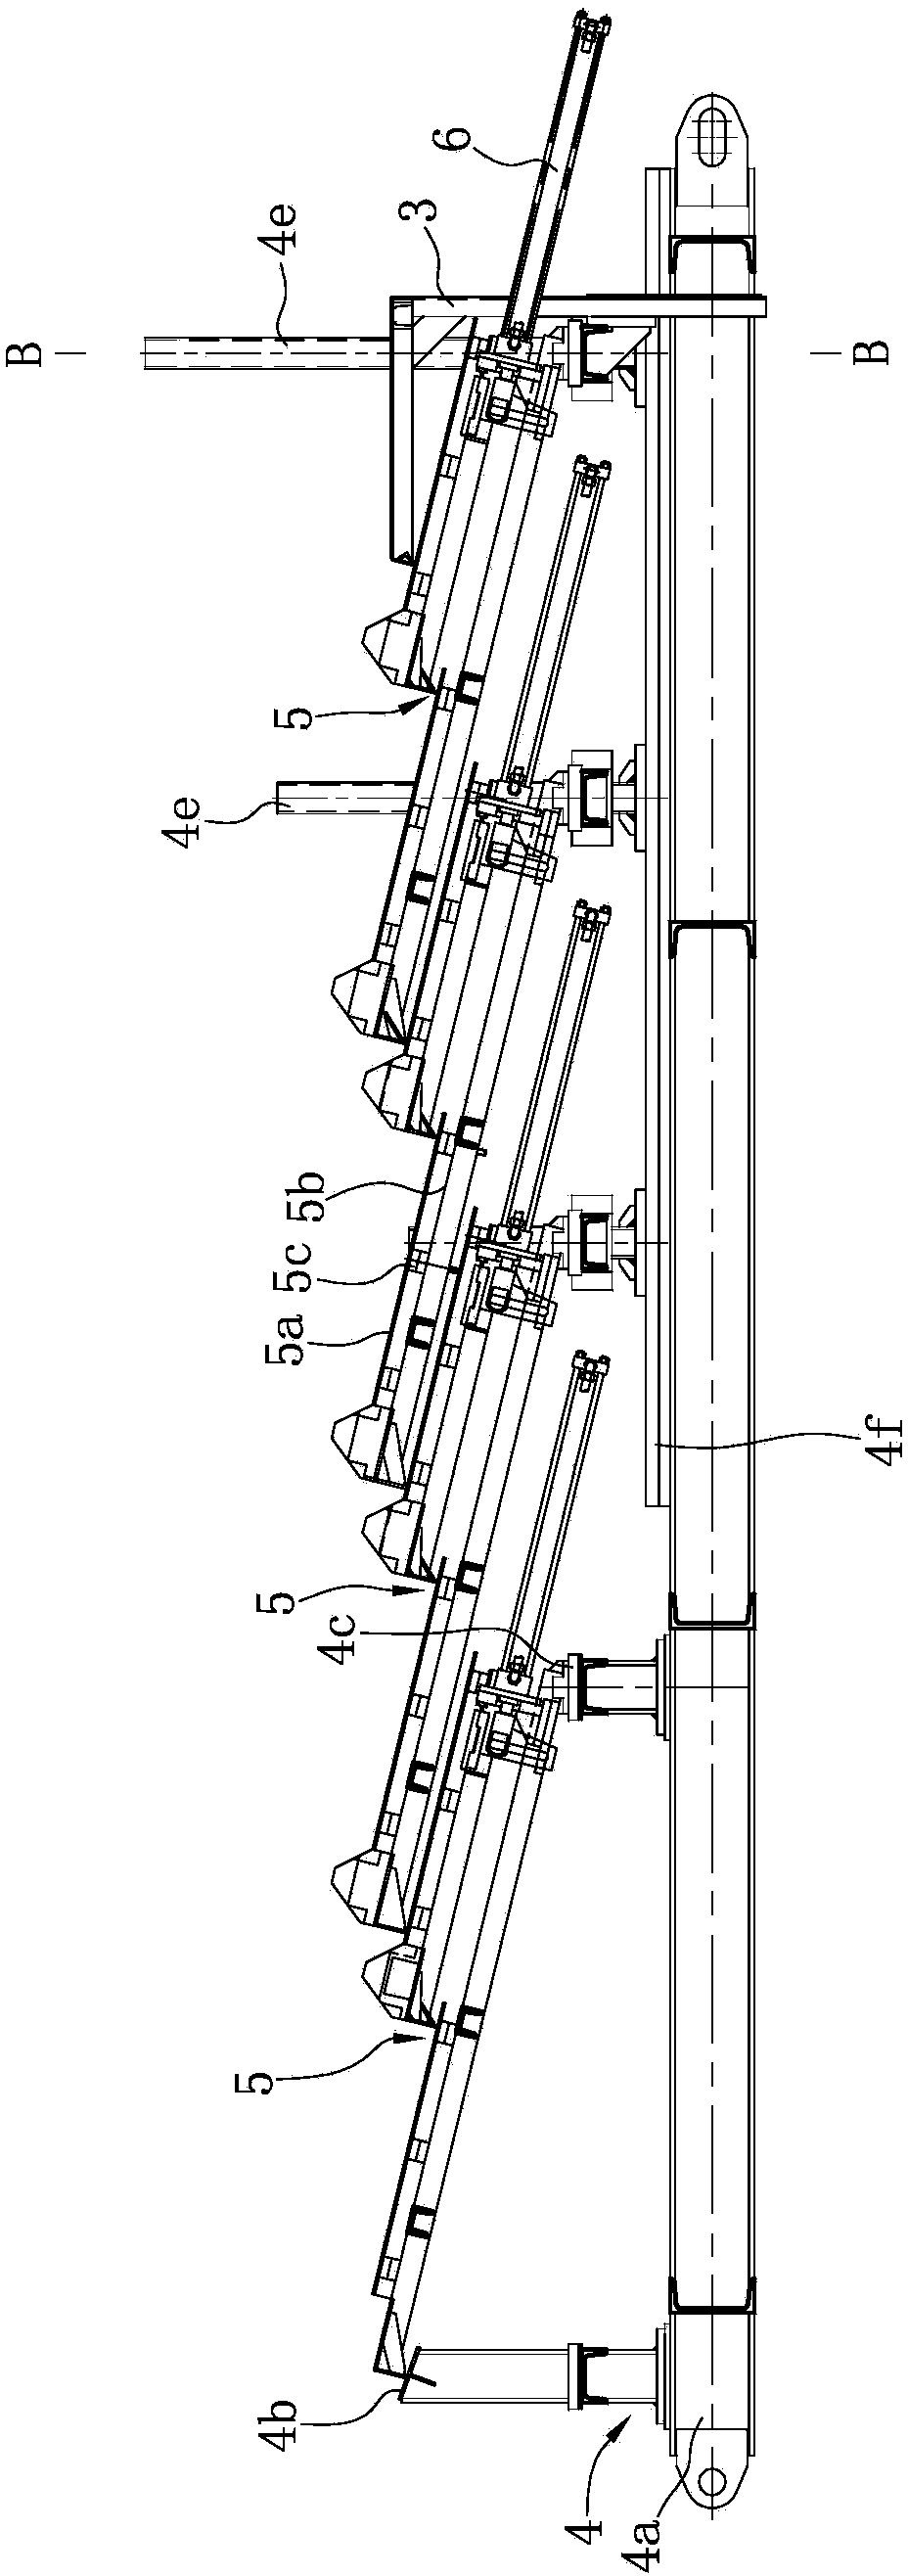 Composite fire grate structural parameter matching and adjusting device